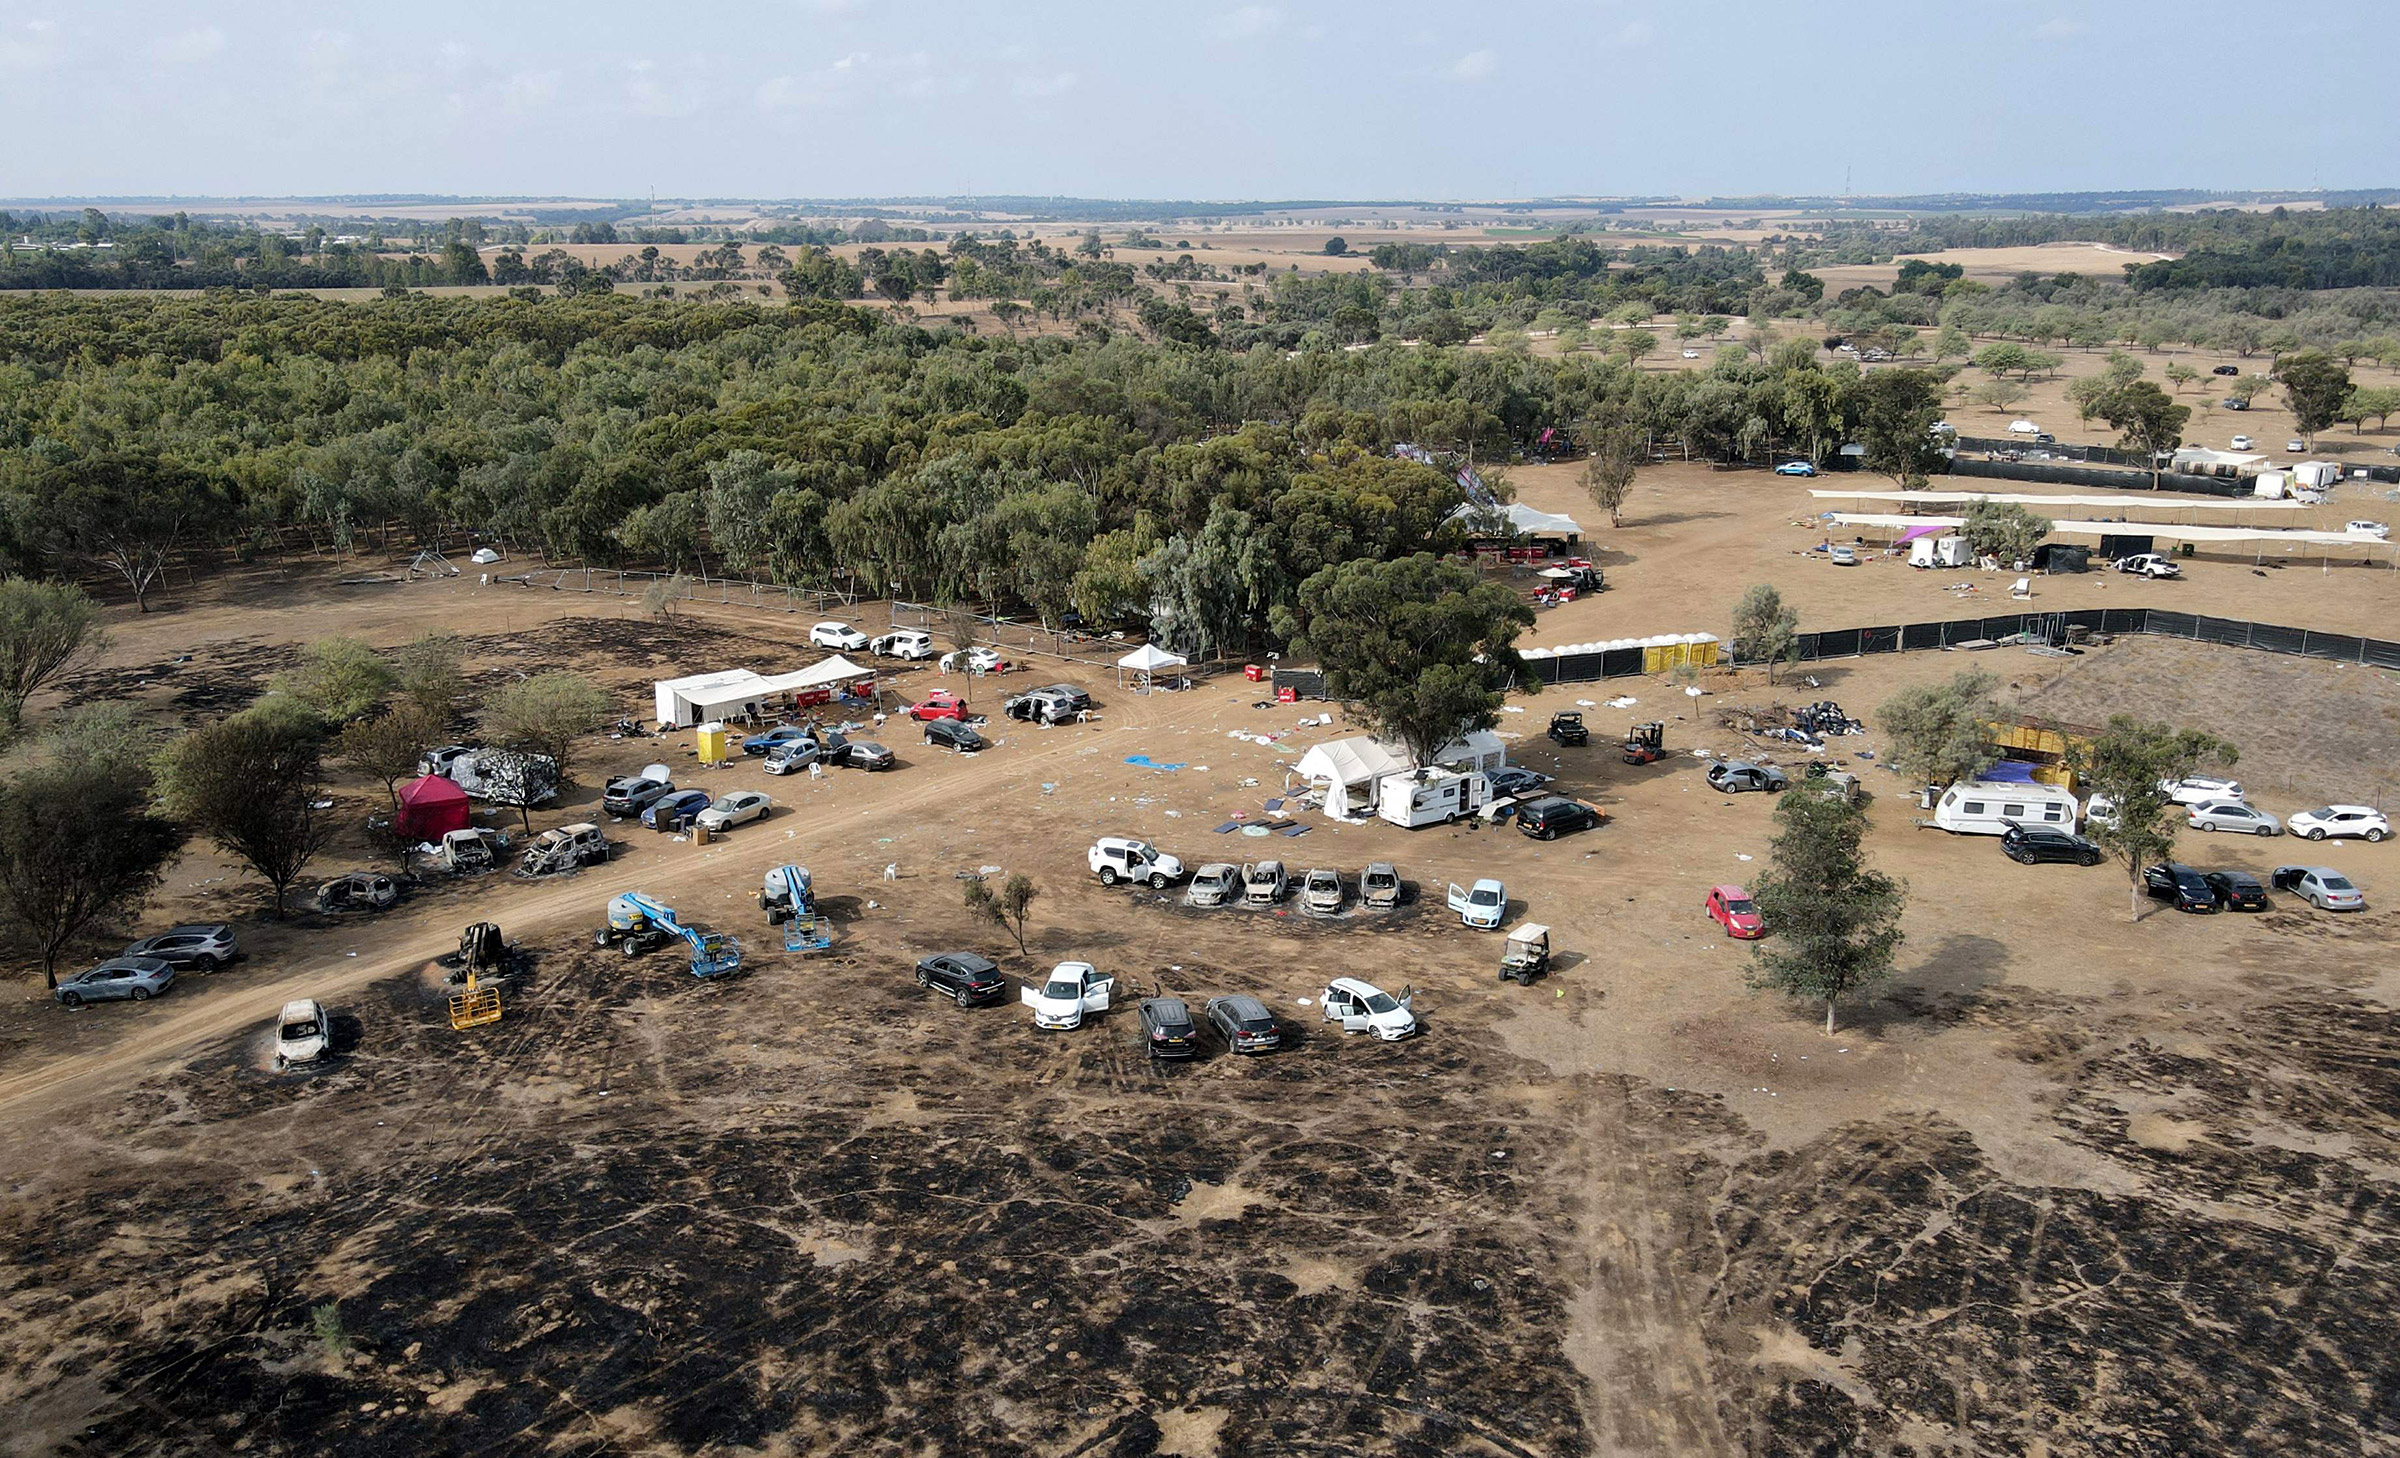 An aerial picture shows the abandoned site of the Supernova Festival, following an attack by Hamas militants, in the Negev desert in southern Israel, on Oct. 10, 2023.